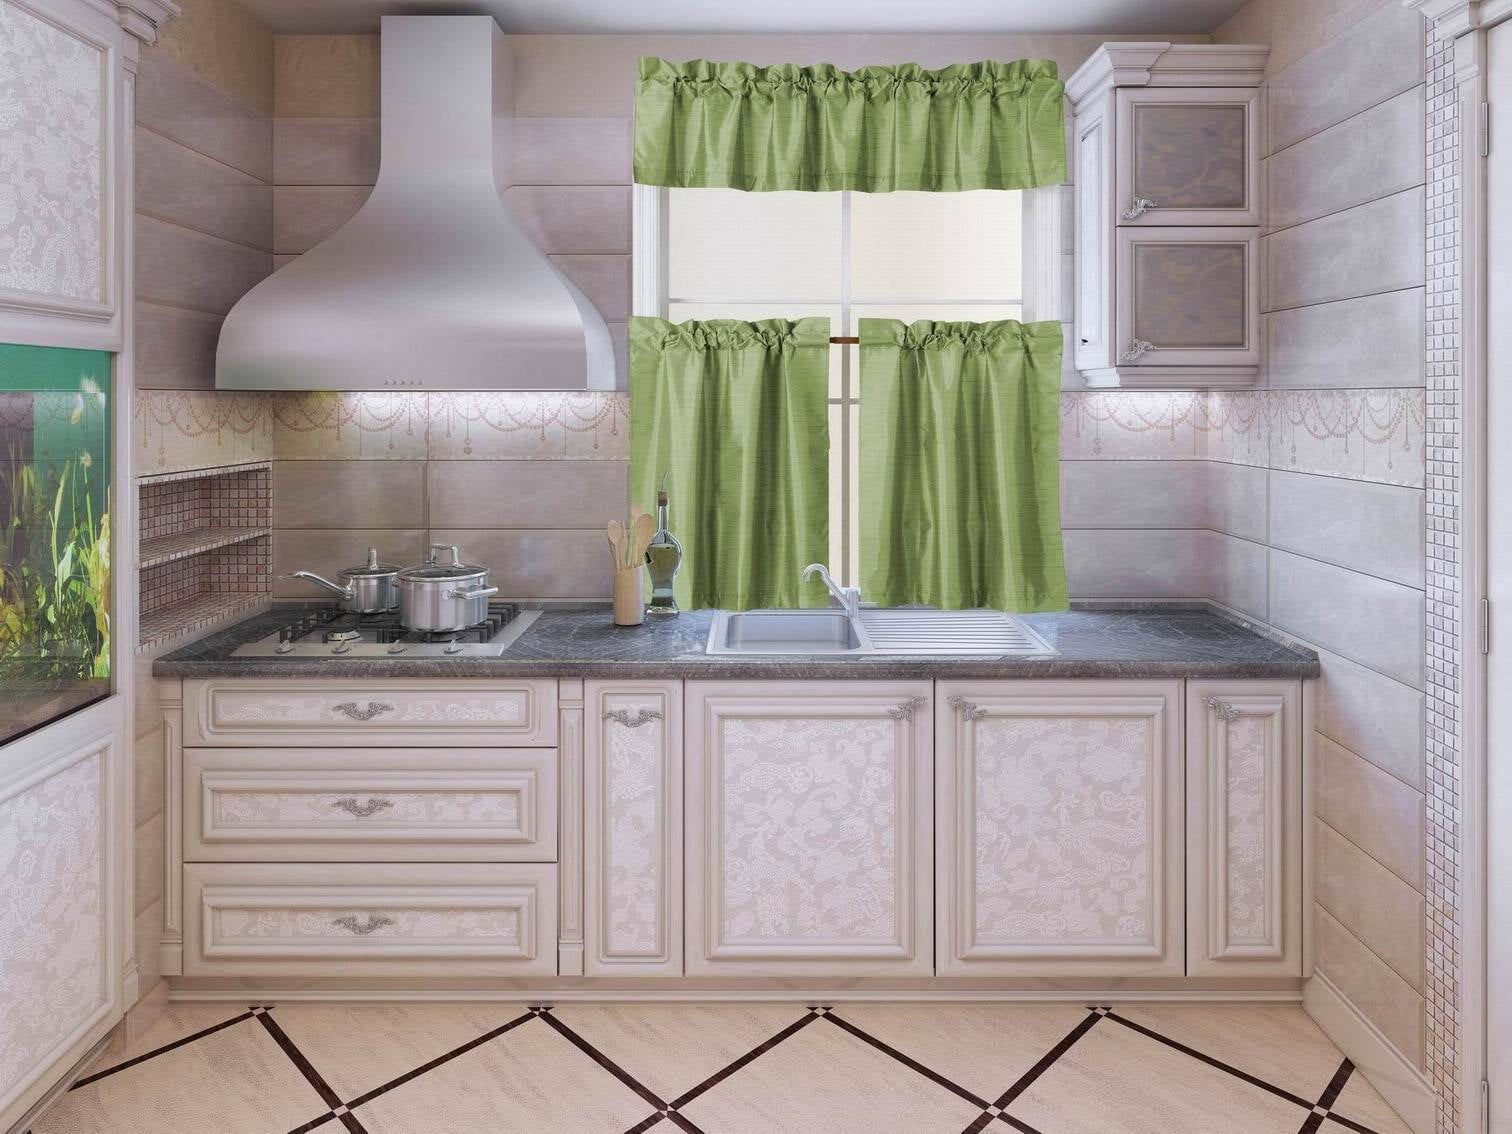 1 VALANCE SET K3 SAGE 3PC SOLID FAUX LINED KITCHEN WINDOW CURTAIN 2 TIERS 